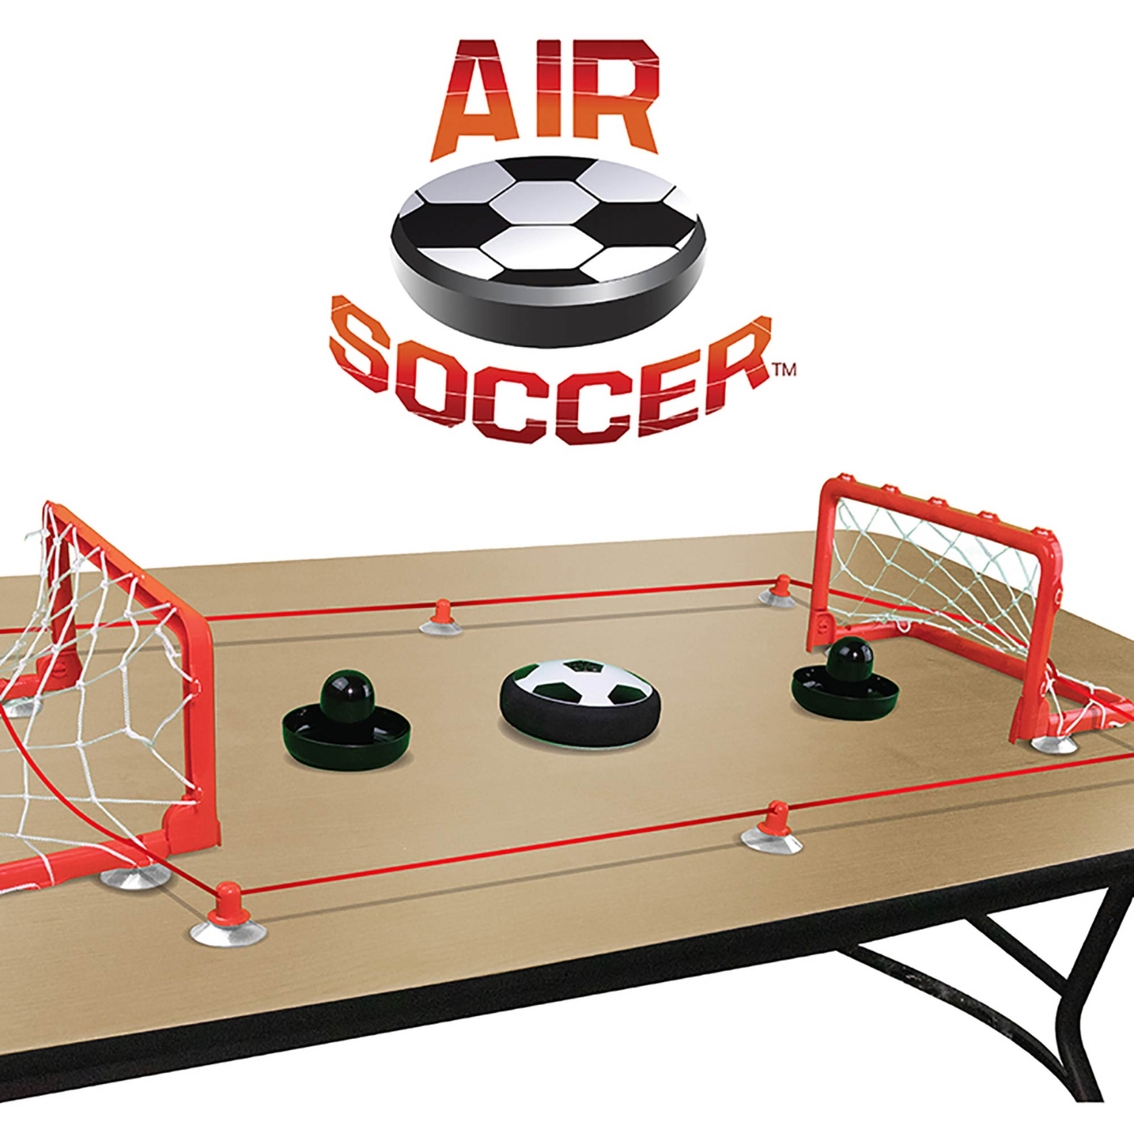 Maccabi Art Air Soccer Set with Paddles and Nets Action Game - Image 5 of 5